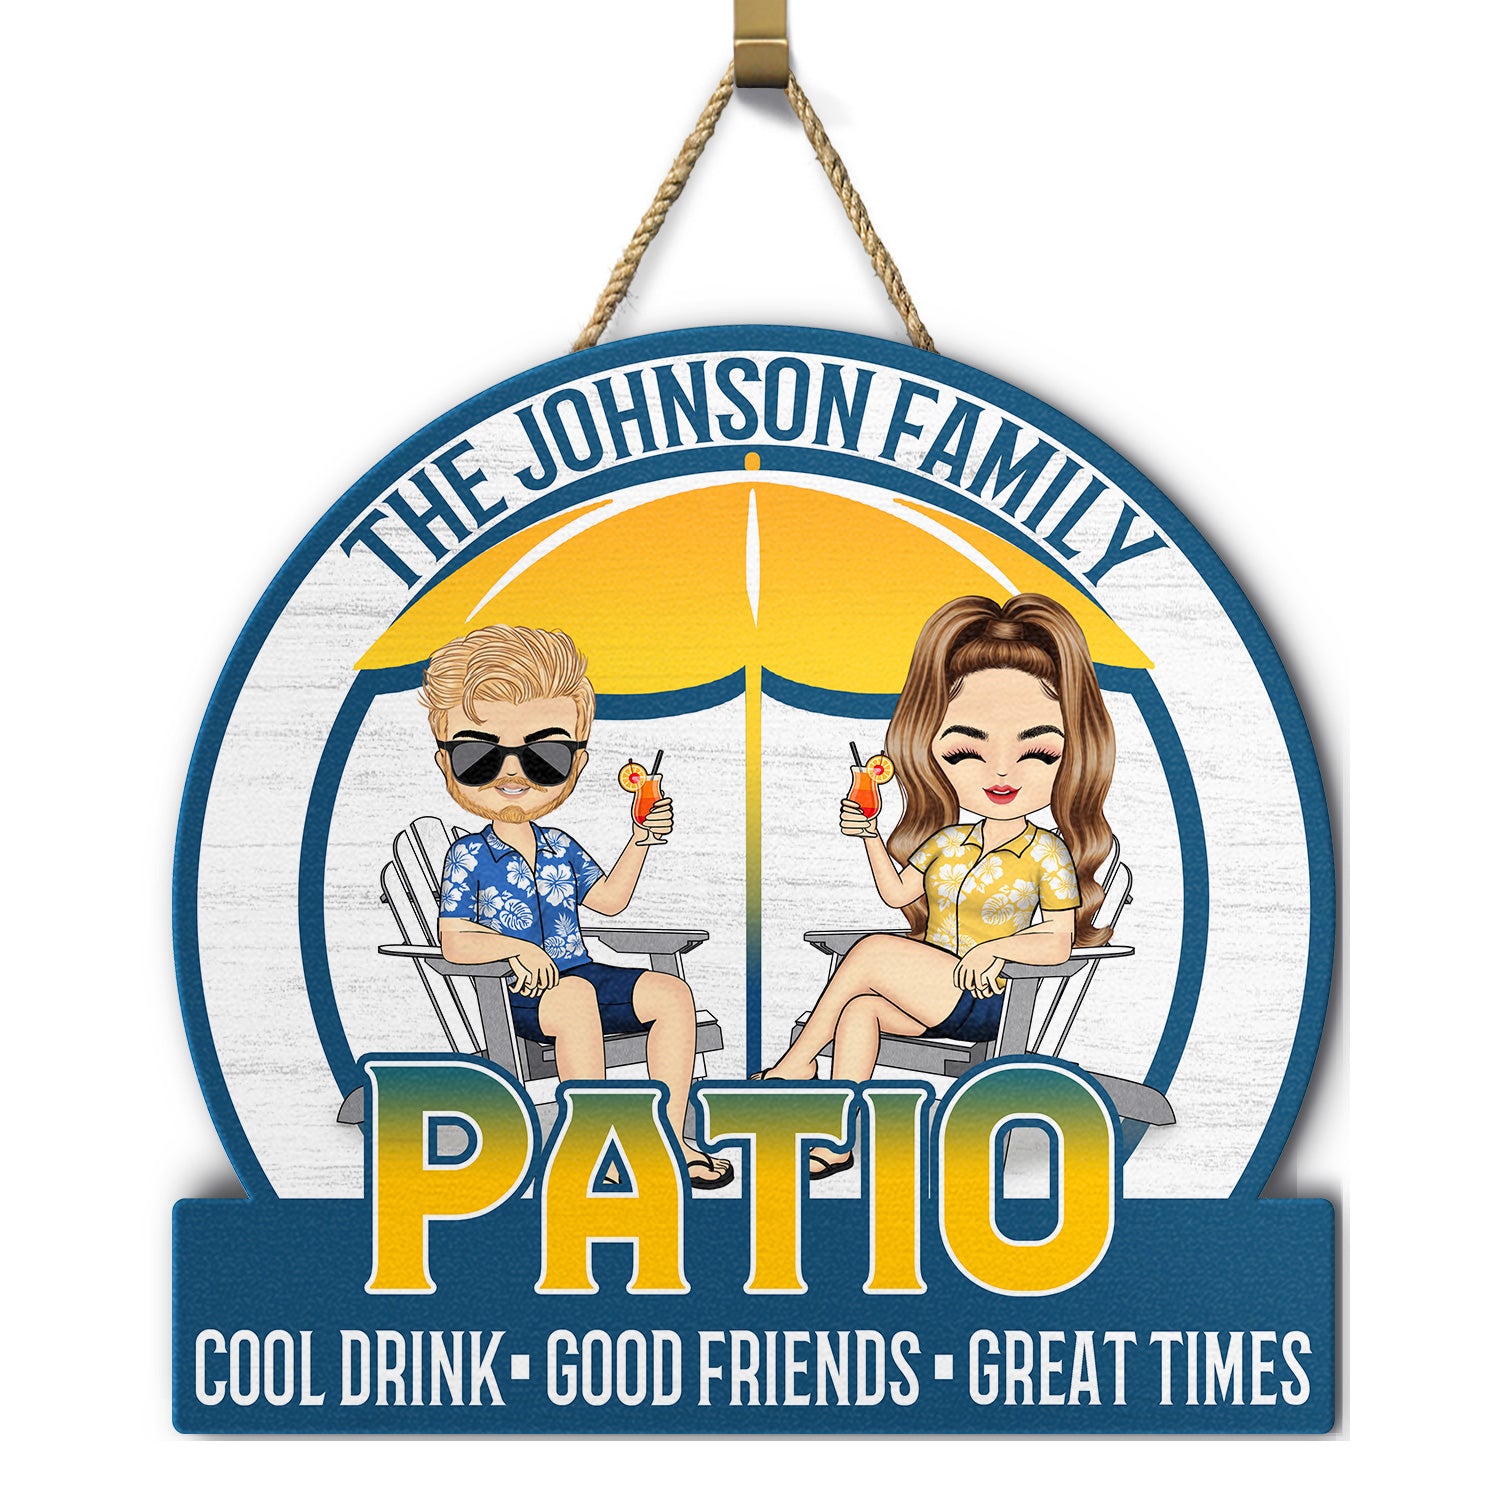 Couple Cool Drink Good Friends Great Time - Outdoor Decoration For Patio, Pool, Deck, Porch, Bar - Personalized Custom Shaped Wood Sign